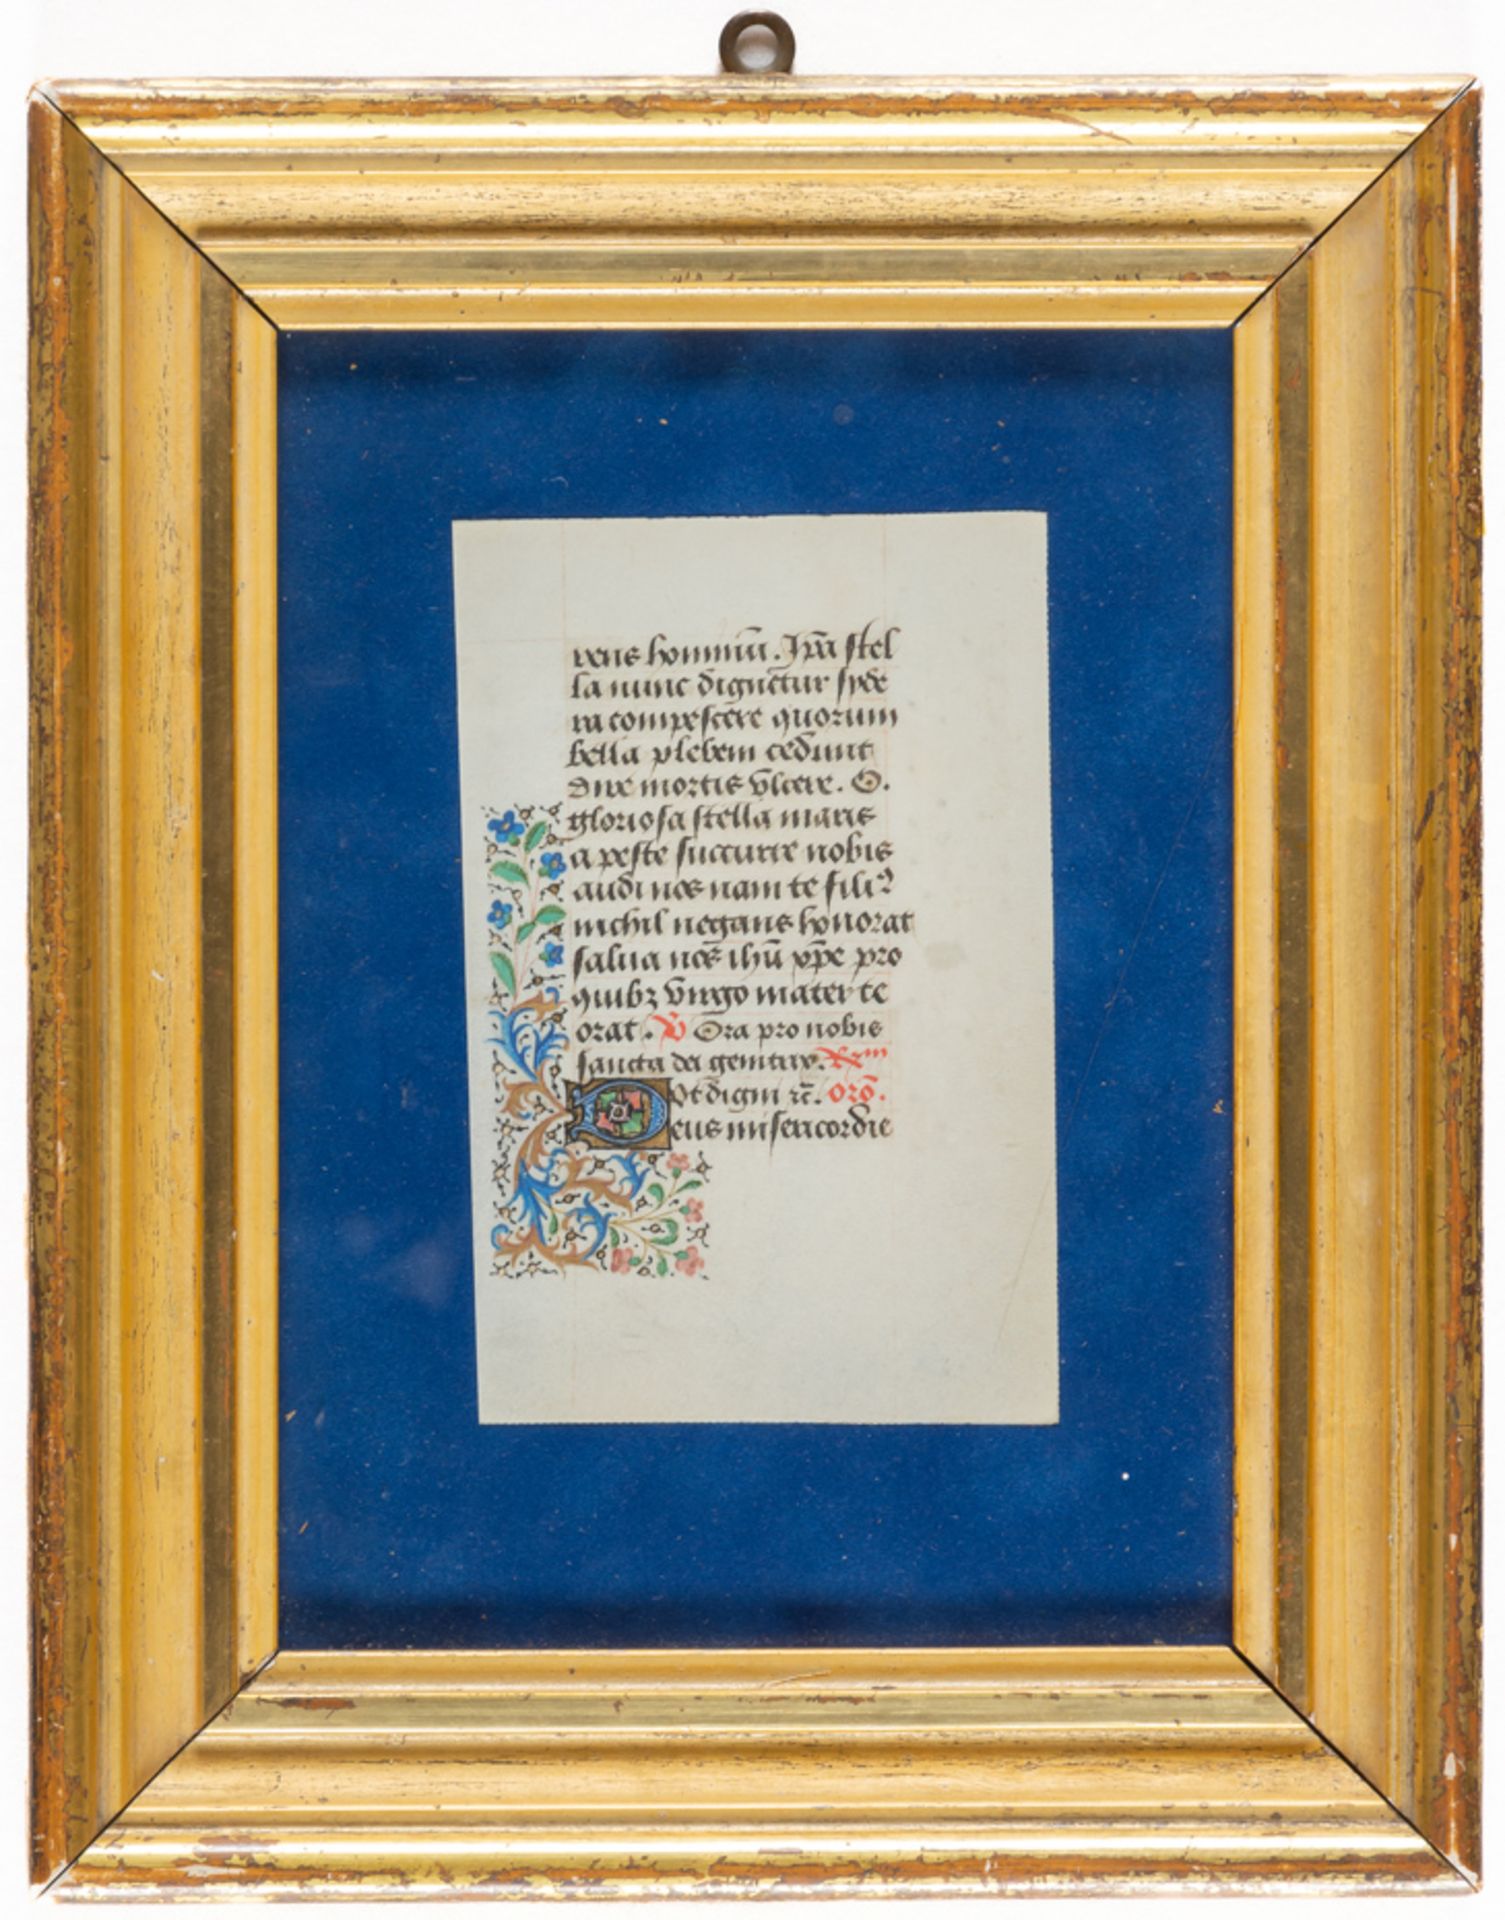 LATIN MANUSCRIPT FROM A BOOK OF HOURS